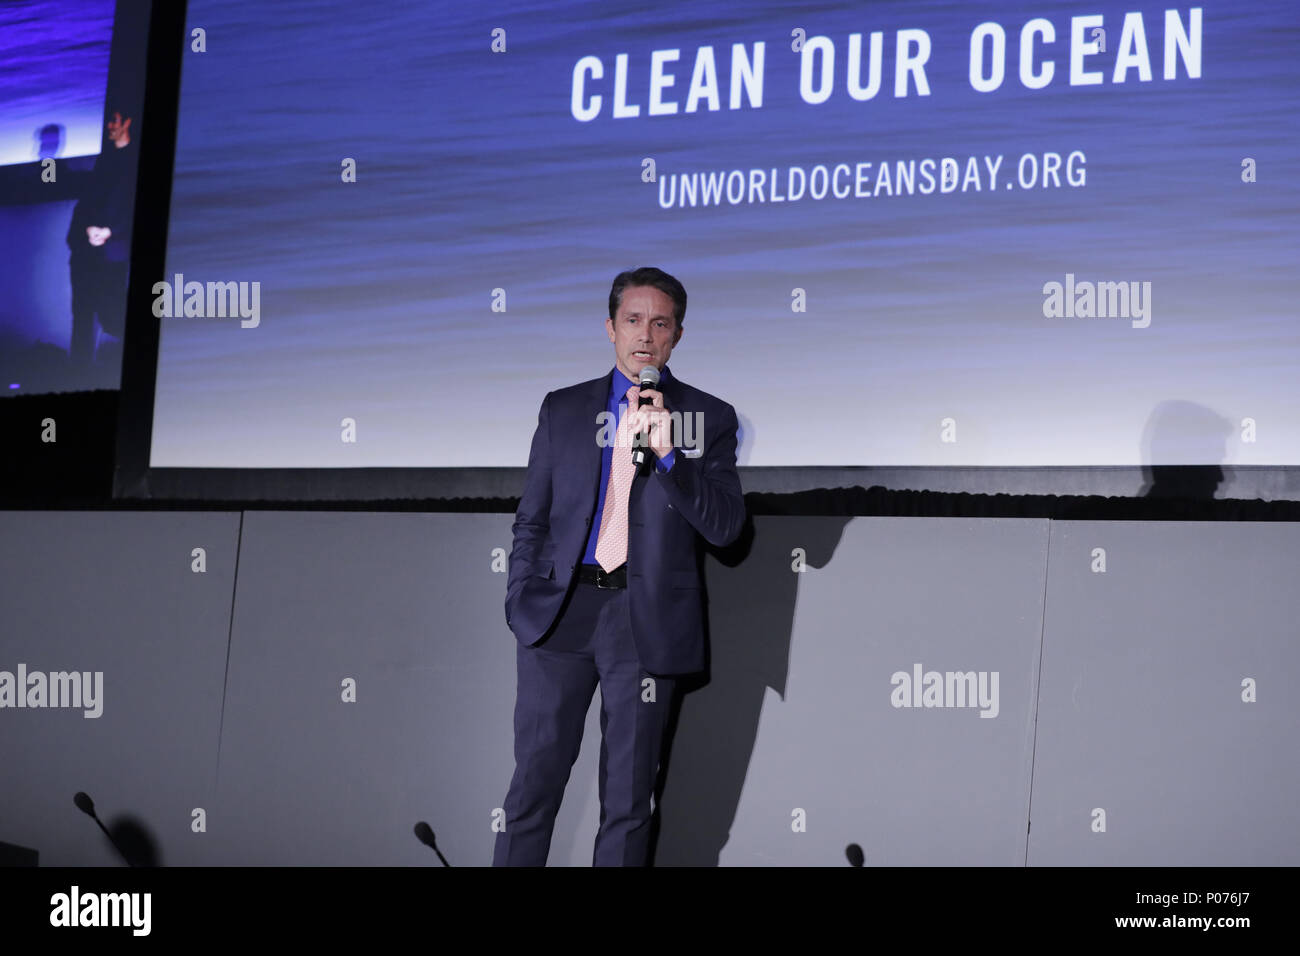 United Nations, New York, USA, June 08 2018. 8th June, 2018. Oceanographer Fabien Cousteau during a panel discussion held on the occasion of World Oceans Day. The discussion highlighted the important roles of youth and innovation in addressing solutions towards cleaning our oceans today at the UN Headquarters in New York City.Photos: Luiz Rampelotto/EuropaNewswire Credit: Luiz Rampelotto/ZUMA Wire/Alamy Live News Stock Photo